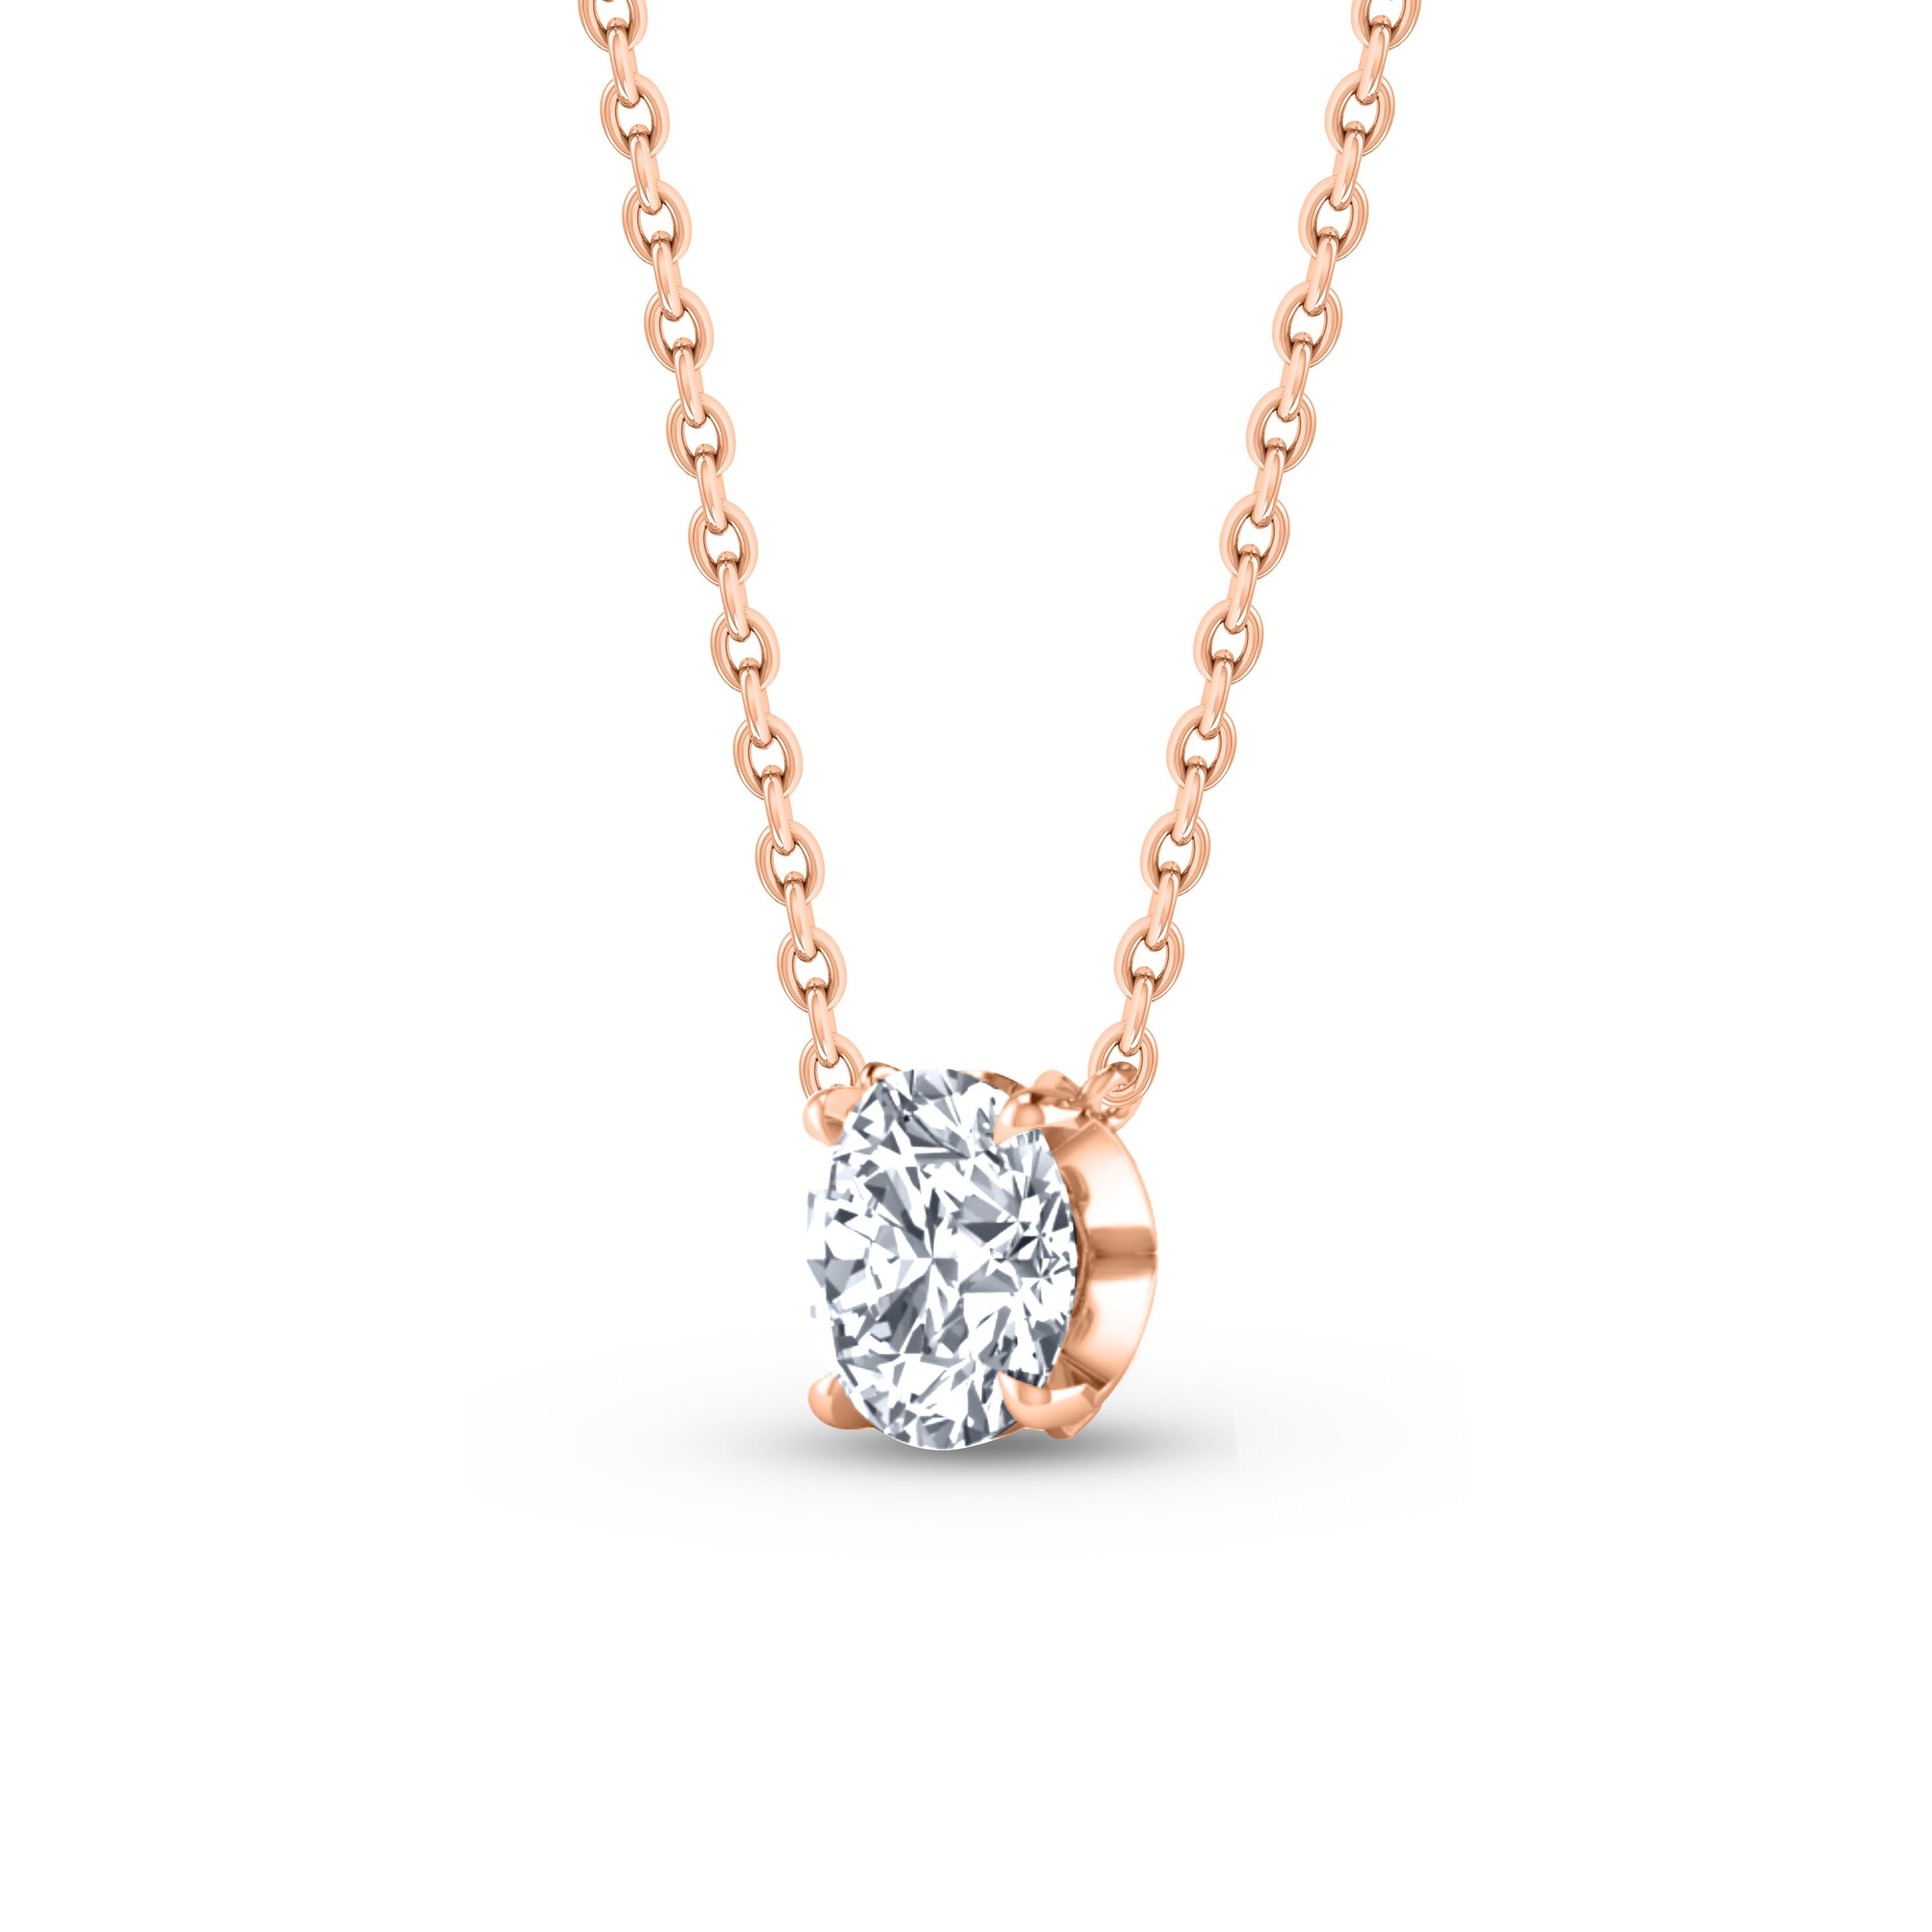  This solitaire diamond necklace features a single, brilliant-cut 0.26 carat diamond in prong setting in 18 KT rose gold. This elegant necklace includes 20-inch cable chain with extender at 18-inch. This classic necklace will be accompanied with a